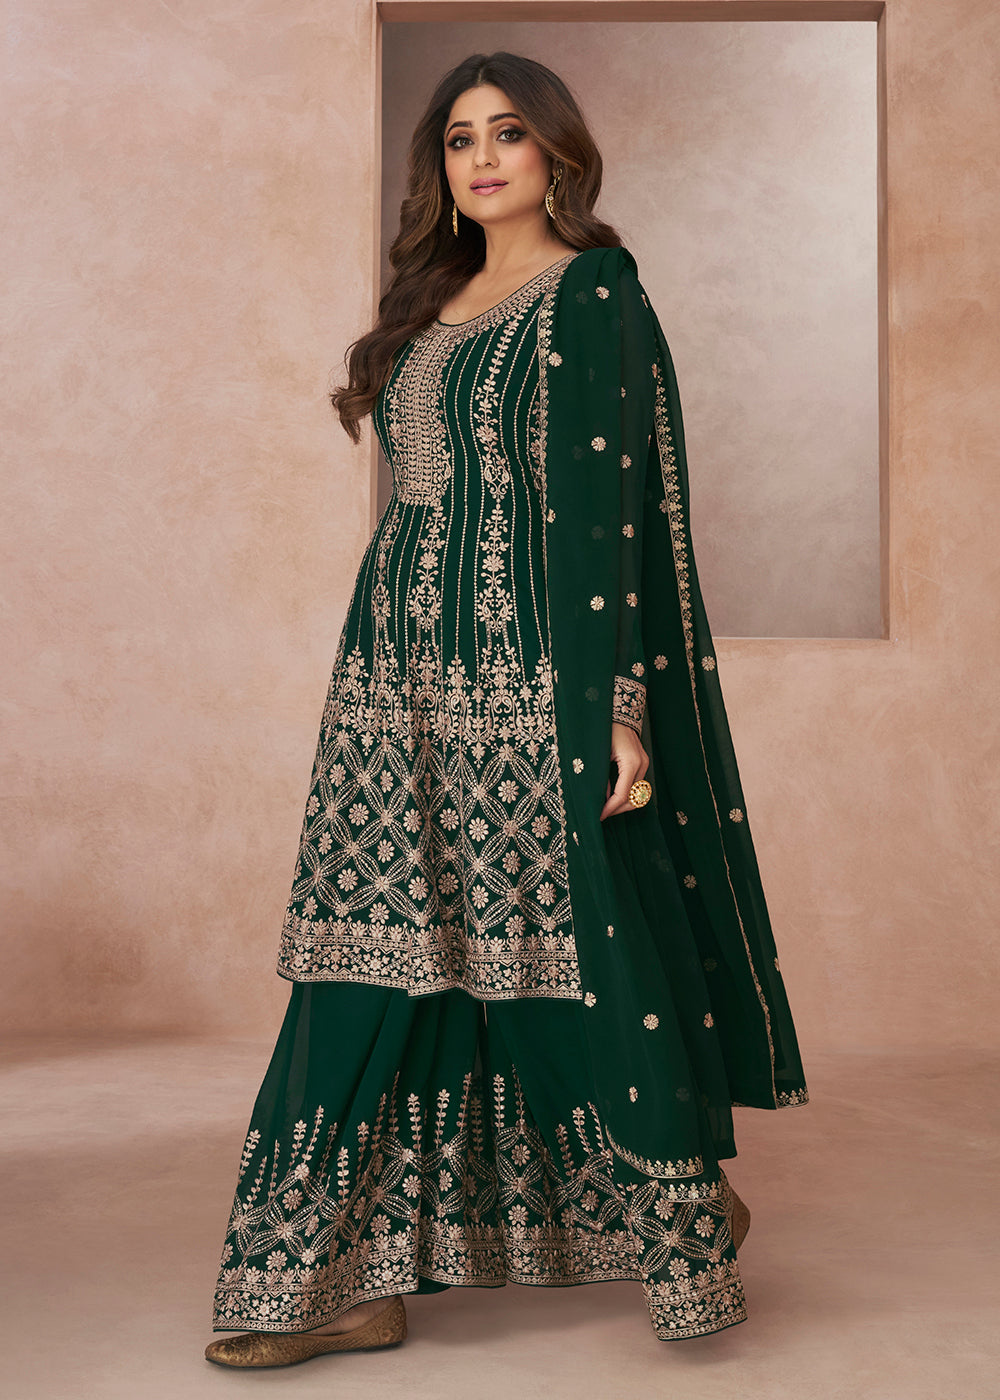 Buy Now Elegant Festive Look Green Georgette Palazzo Style Suit Online in USA, UK, Canada, Germany, Australia & Worldwide at Empress Clothing.